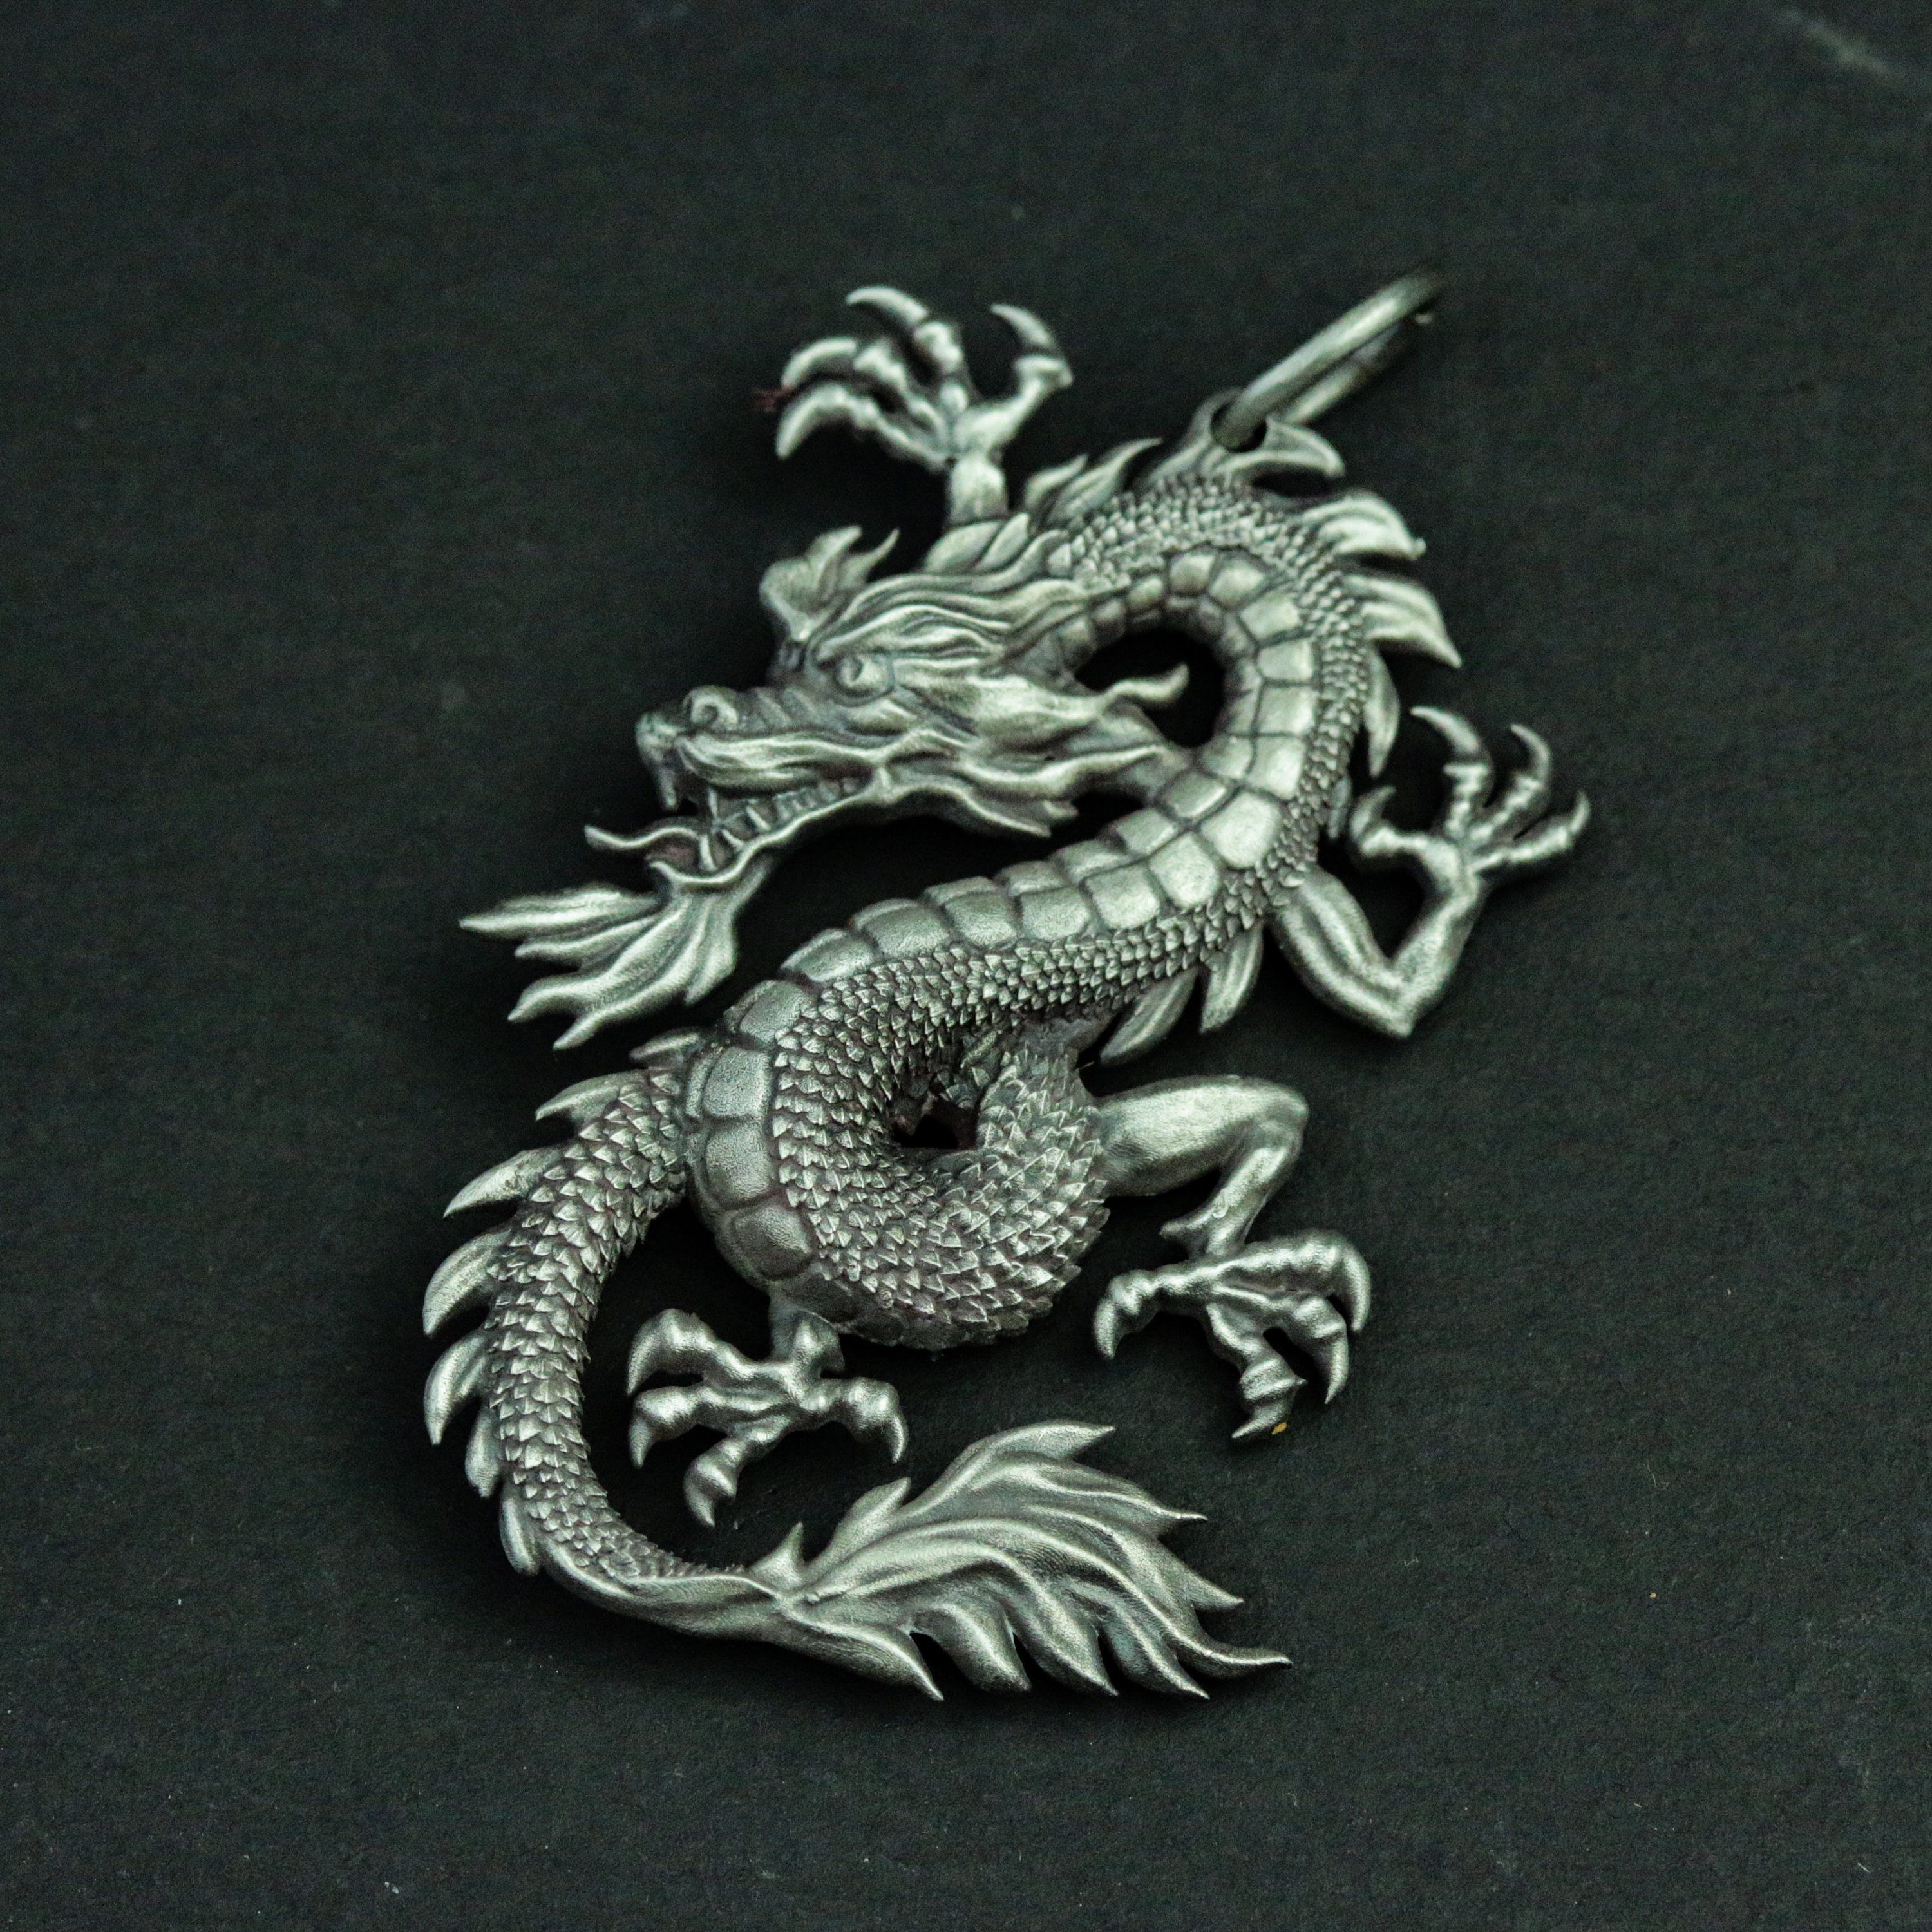 6-Piece Chinese Dragon Charms - 25mm Silver Color Pendants for Jewelry Making, DIY Crafts, and Handmade Necklaces